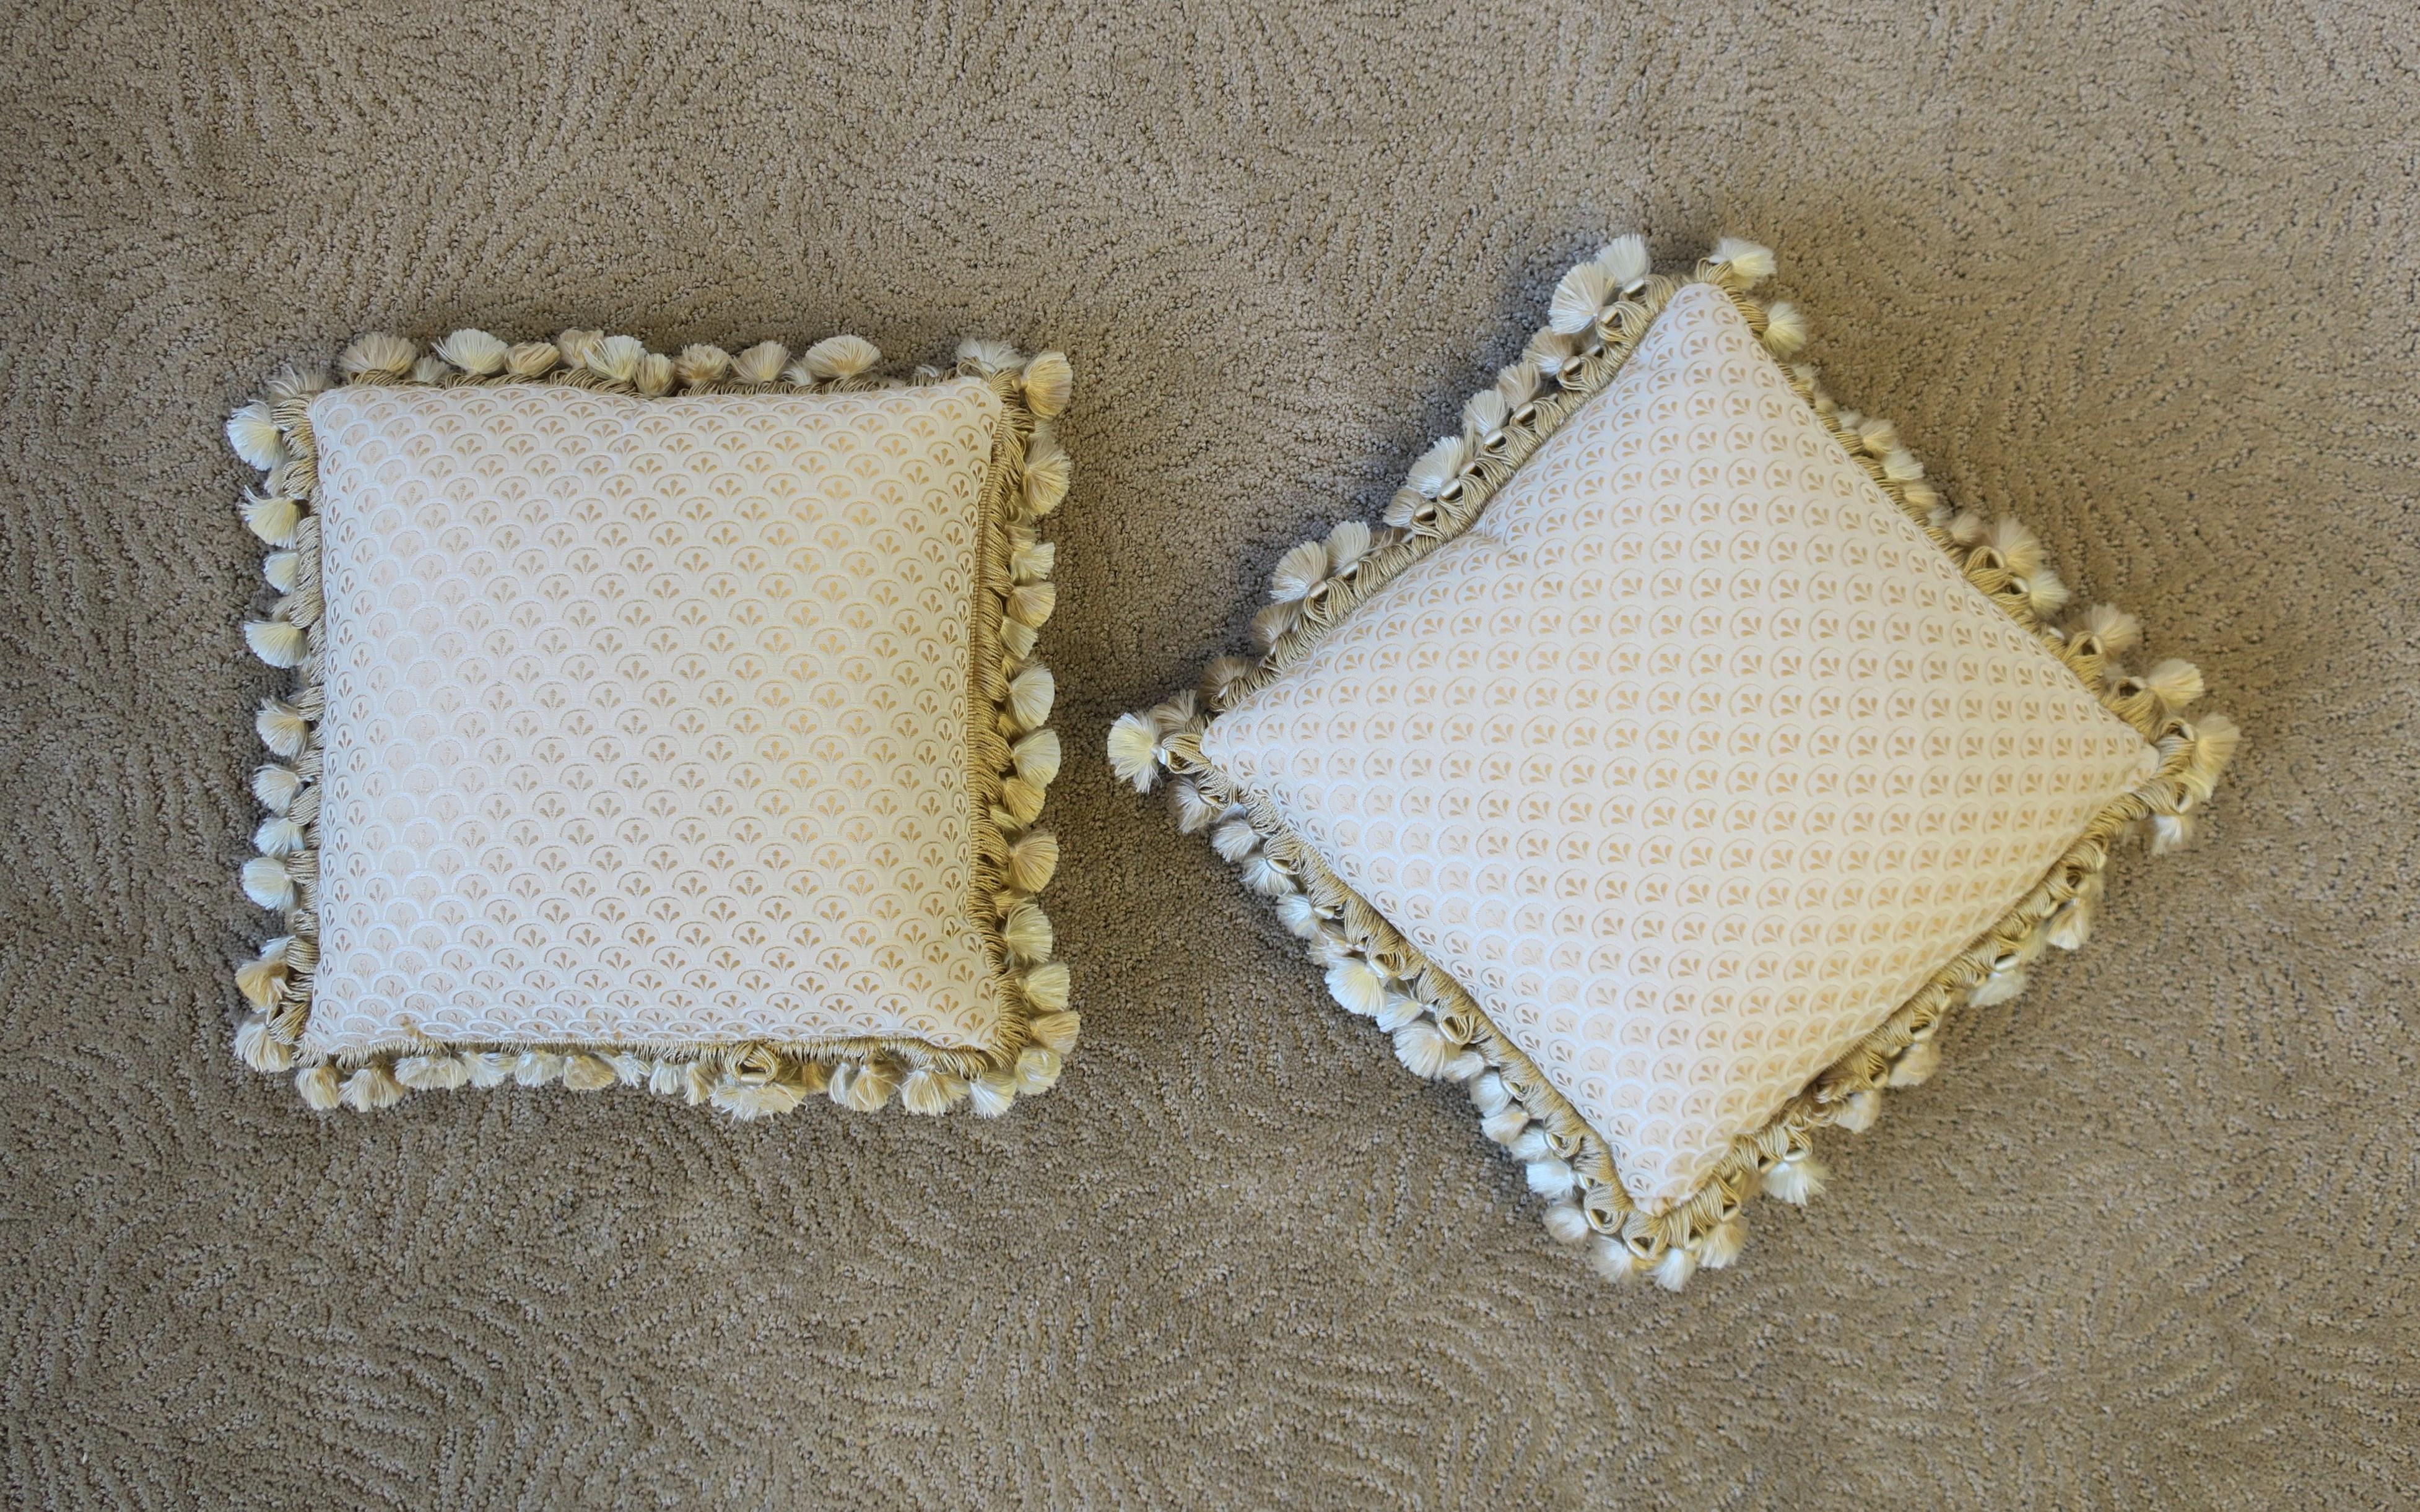 A very beautiful pair of custom upholstered silk accent pillows with fringe and tassels. Pillows are very well made with the best materials. Colors include shades of cream, gold, champagne, and beige/tan (please see image #8 for close-up.)

Each